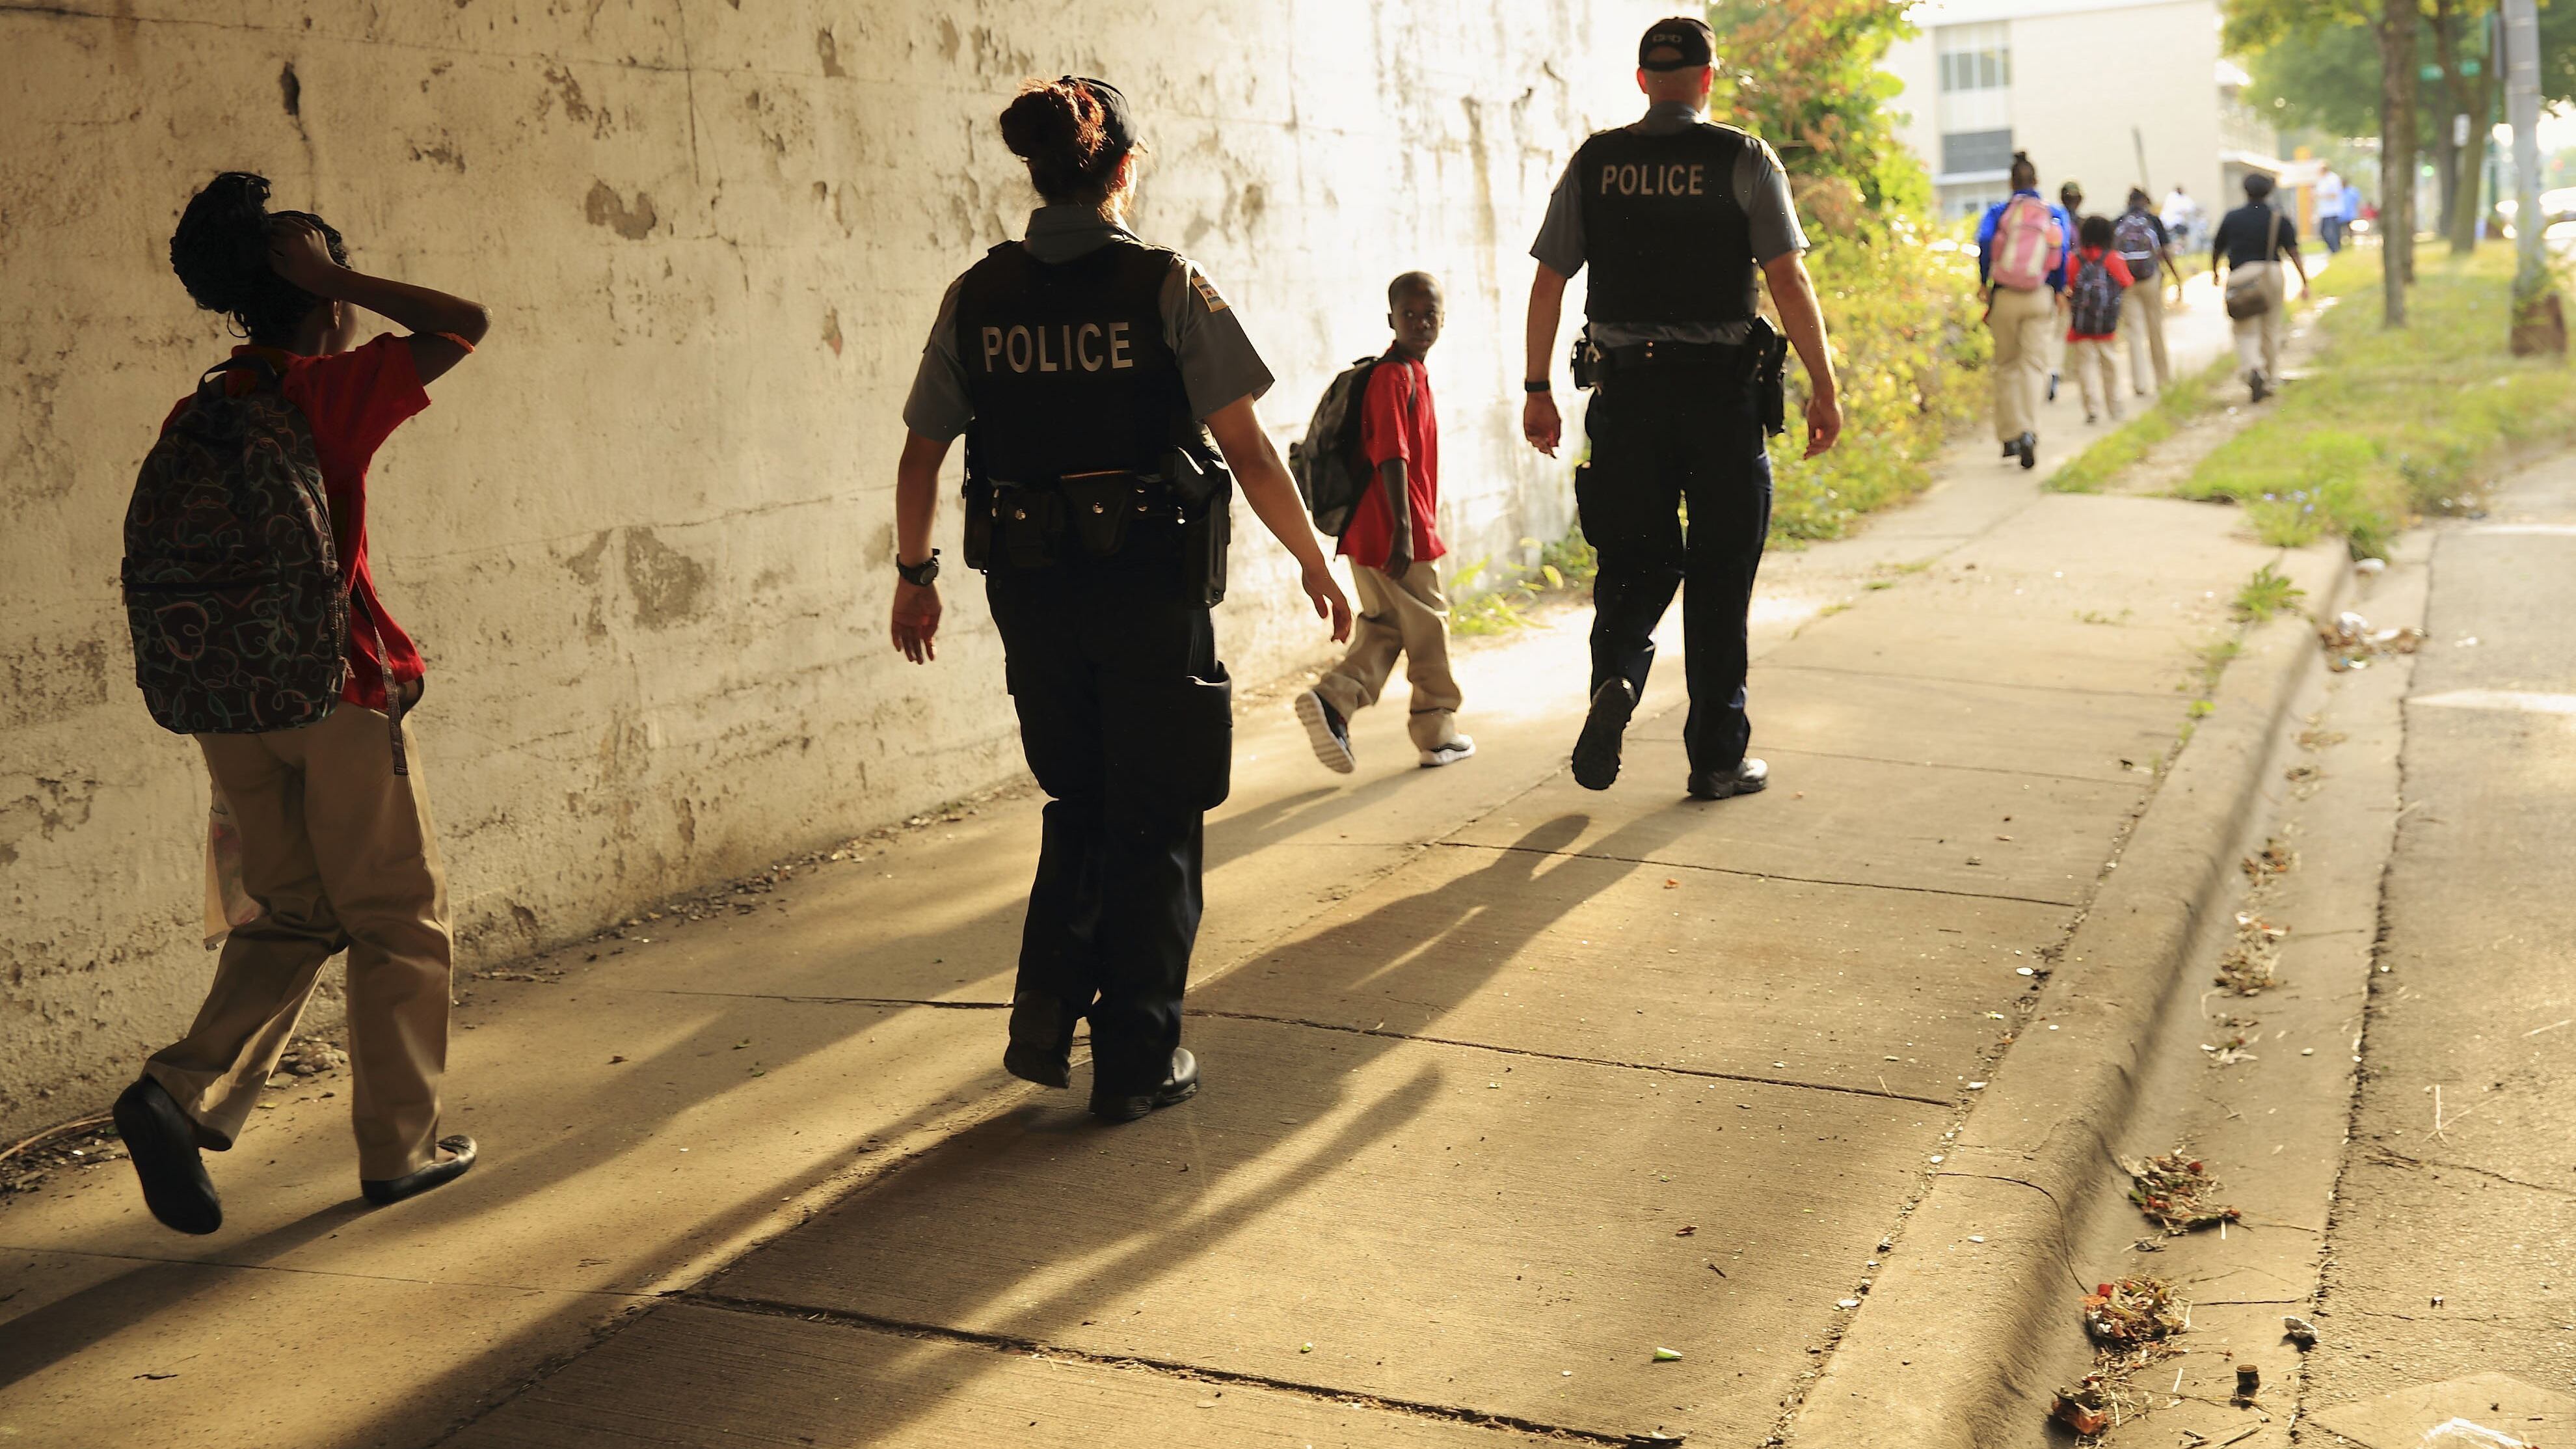 Two Chicago Police Department officers, wearing black vests with “POLICE” in white lettering on the back, escort children to school. The sun casts long shadows behind those walking down the sidewalk.